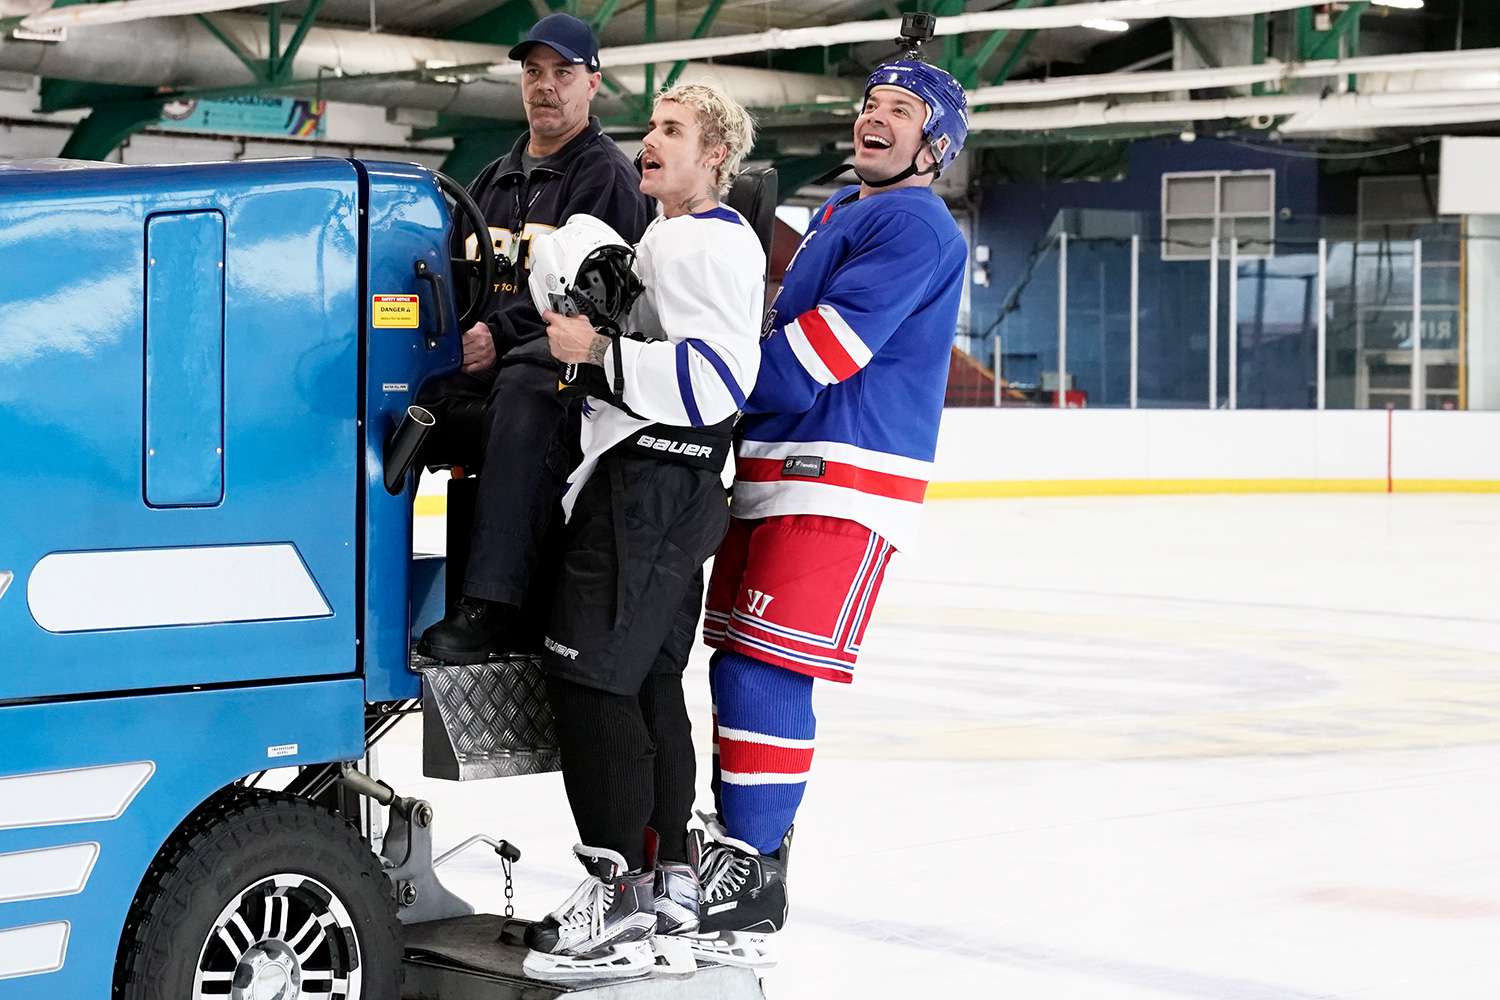 THE TONIGHT SHOW STARRING JIMMY FALLON -- Episode 1209 -- Pictured: (l-r) Singer Justin Bieber and host Jimmy Fallon play Hockey on February 13, 2020